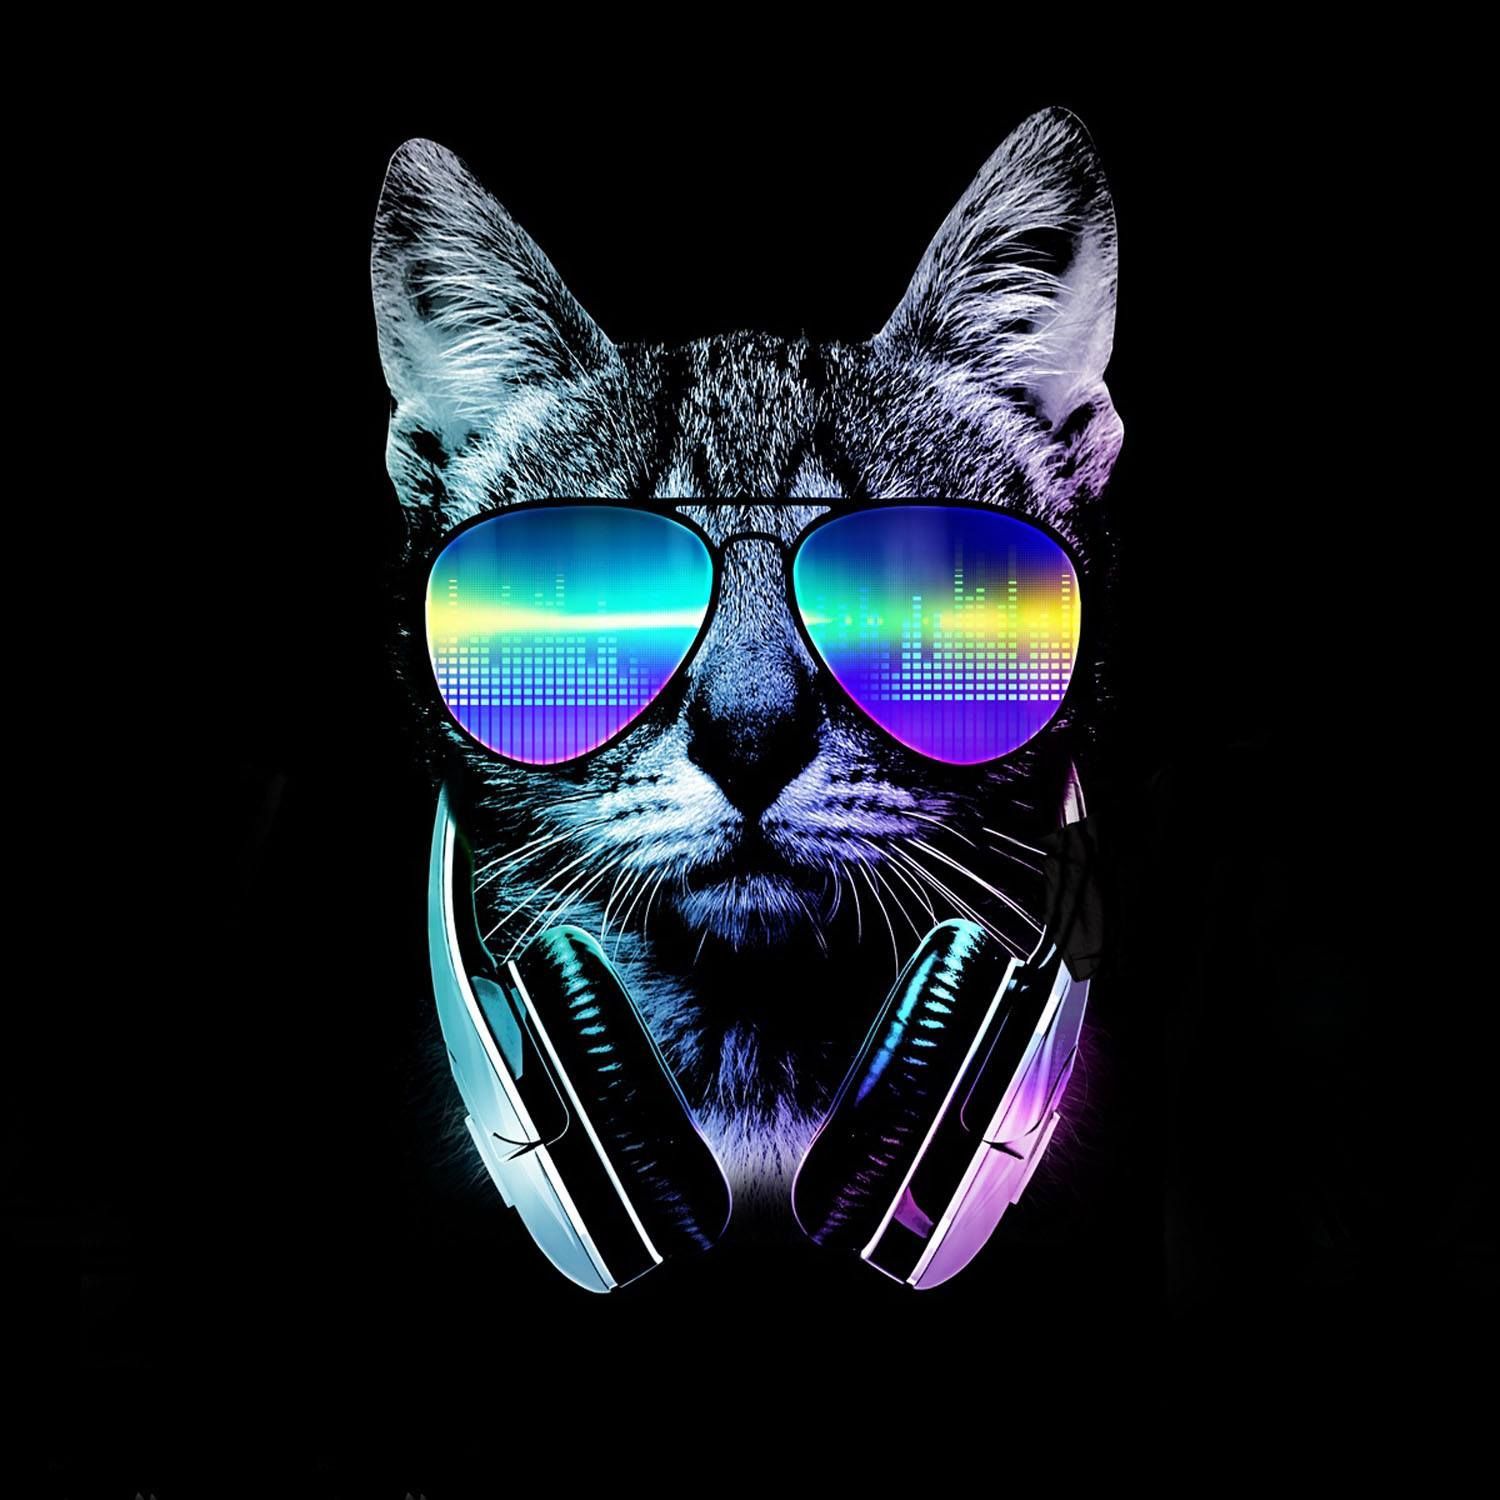 nice :). Cool cats, Wallpaper, Music lovers